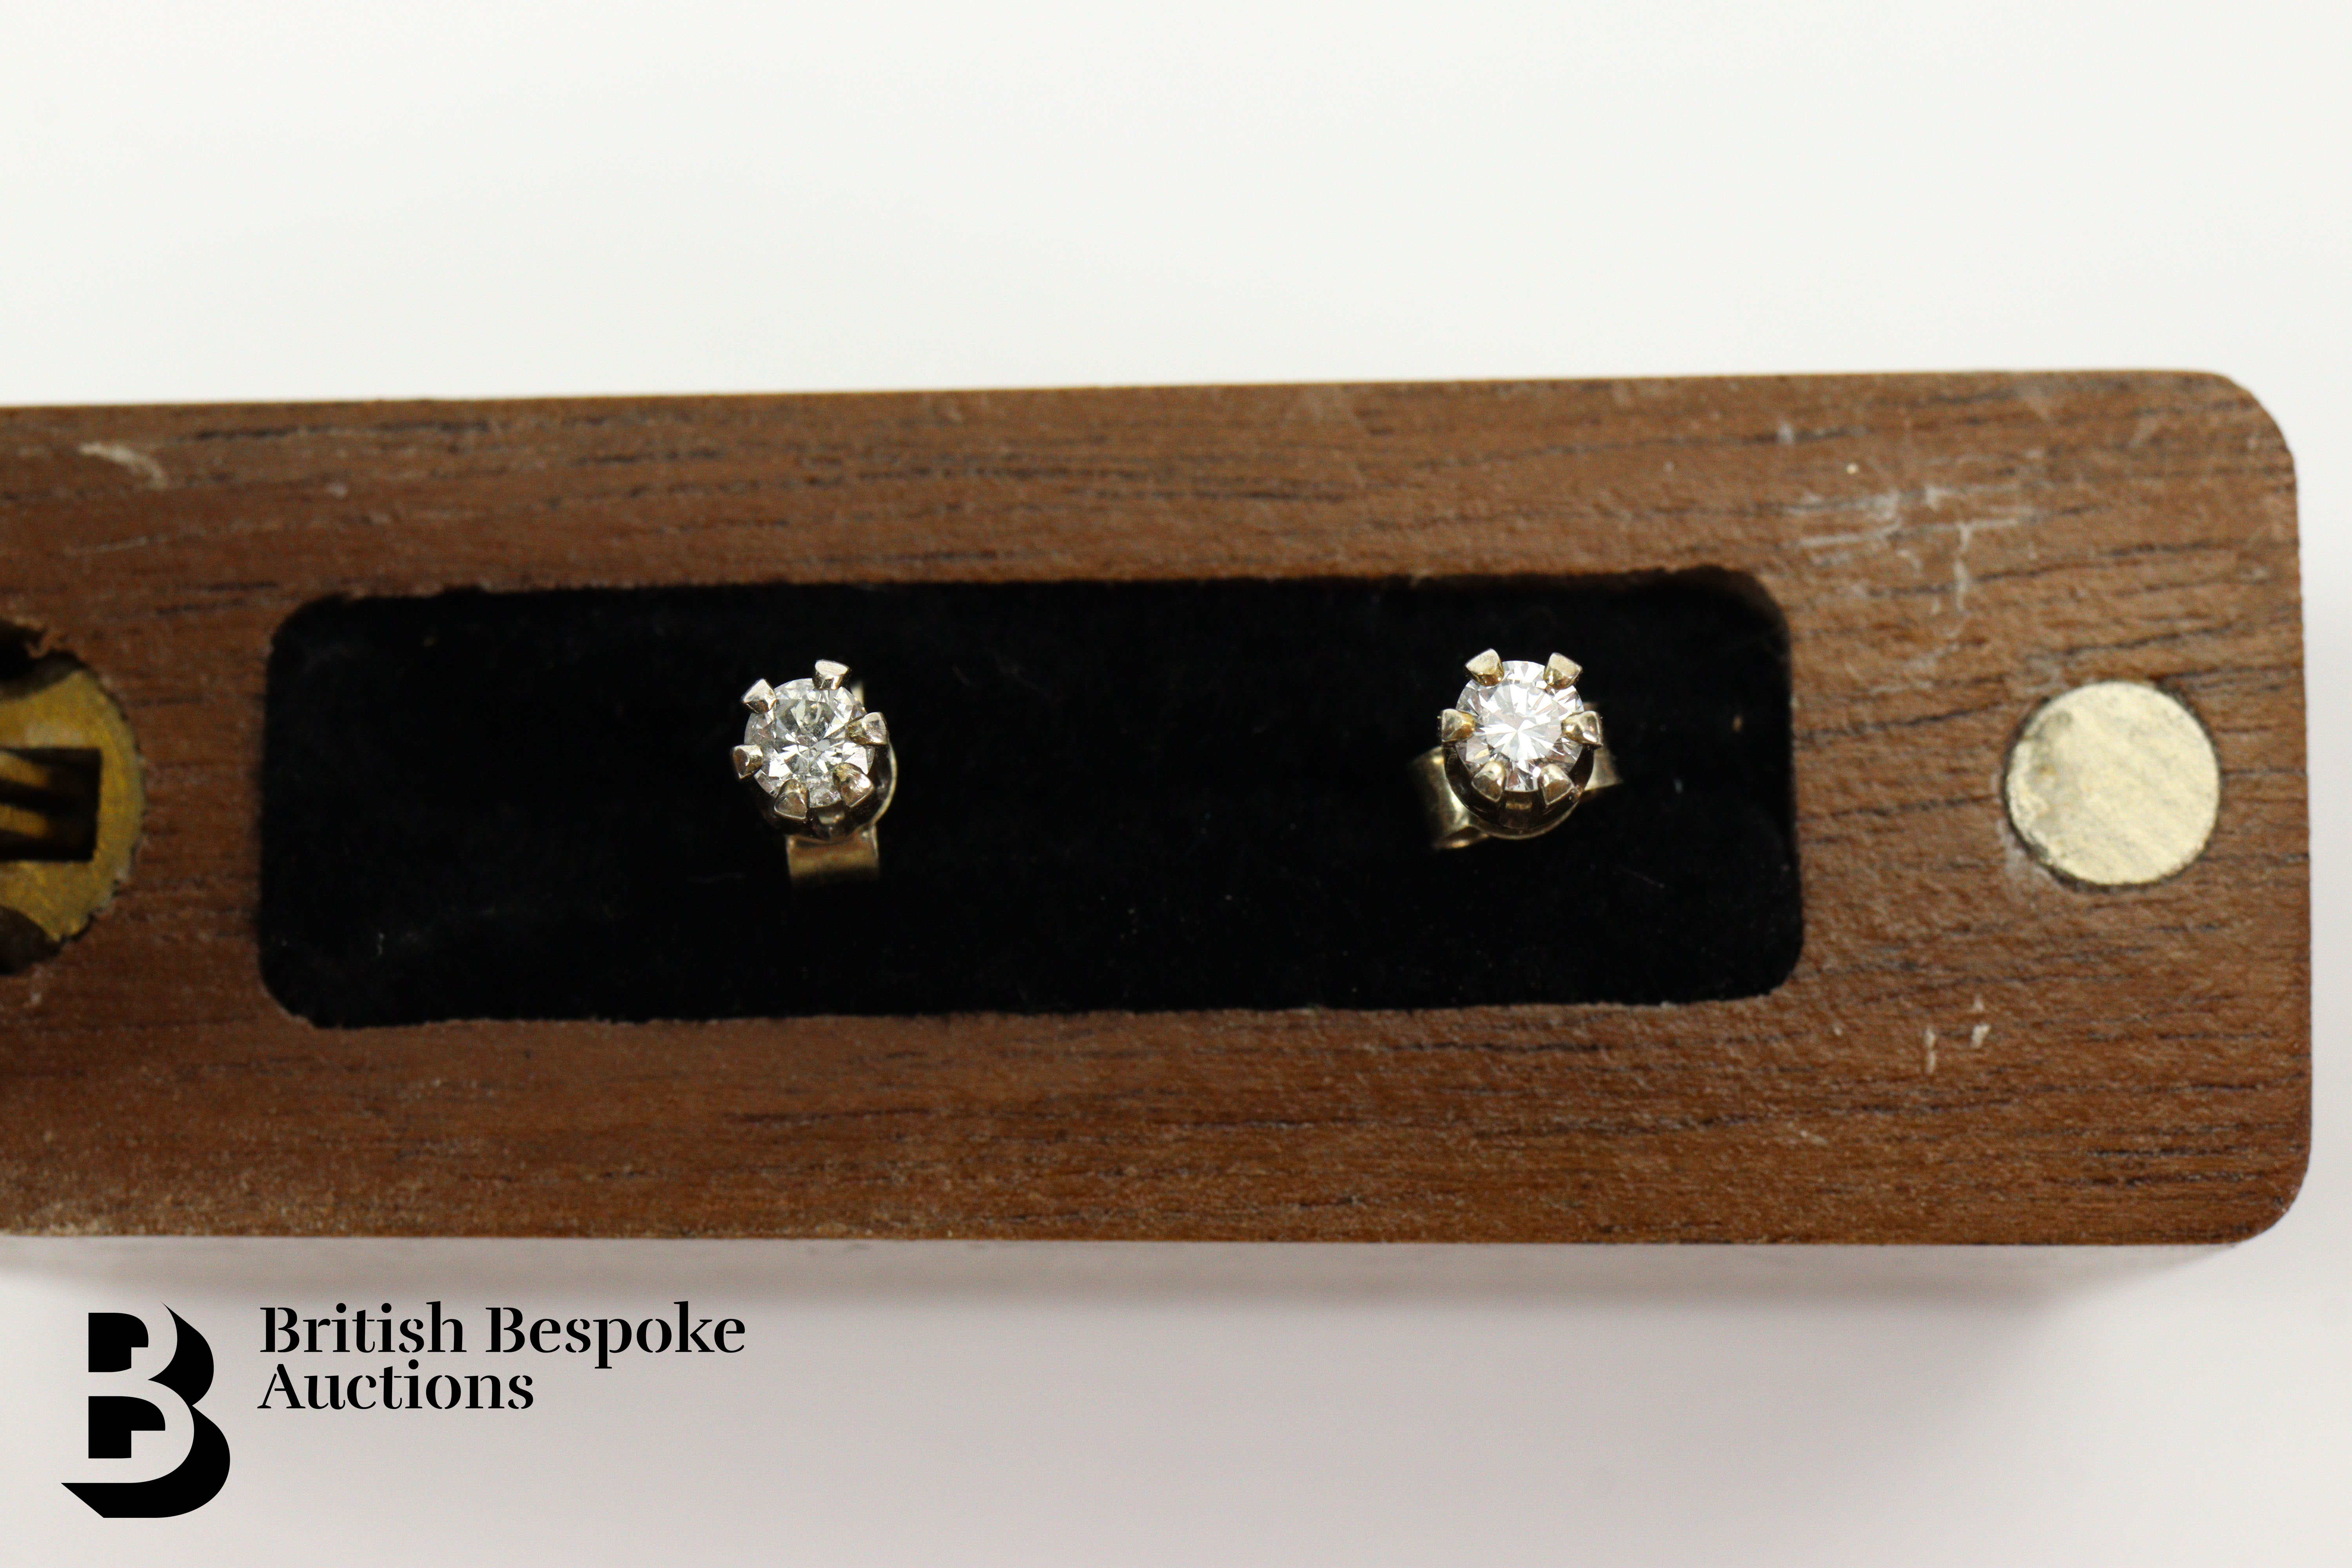 Pair of 9ct Gold Diamond Ear Studs - Image 2 of 4